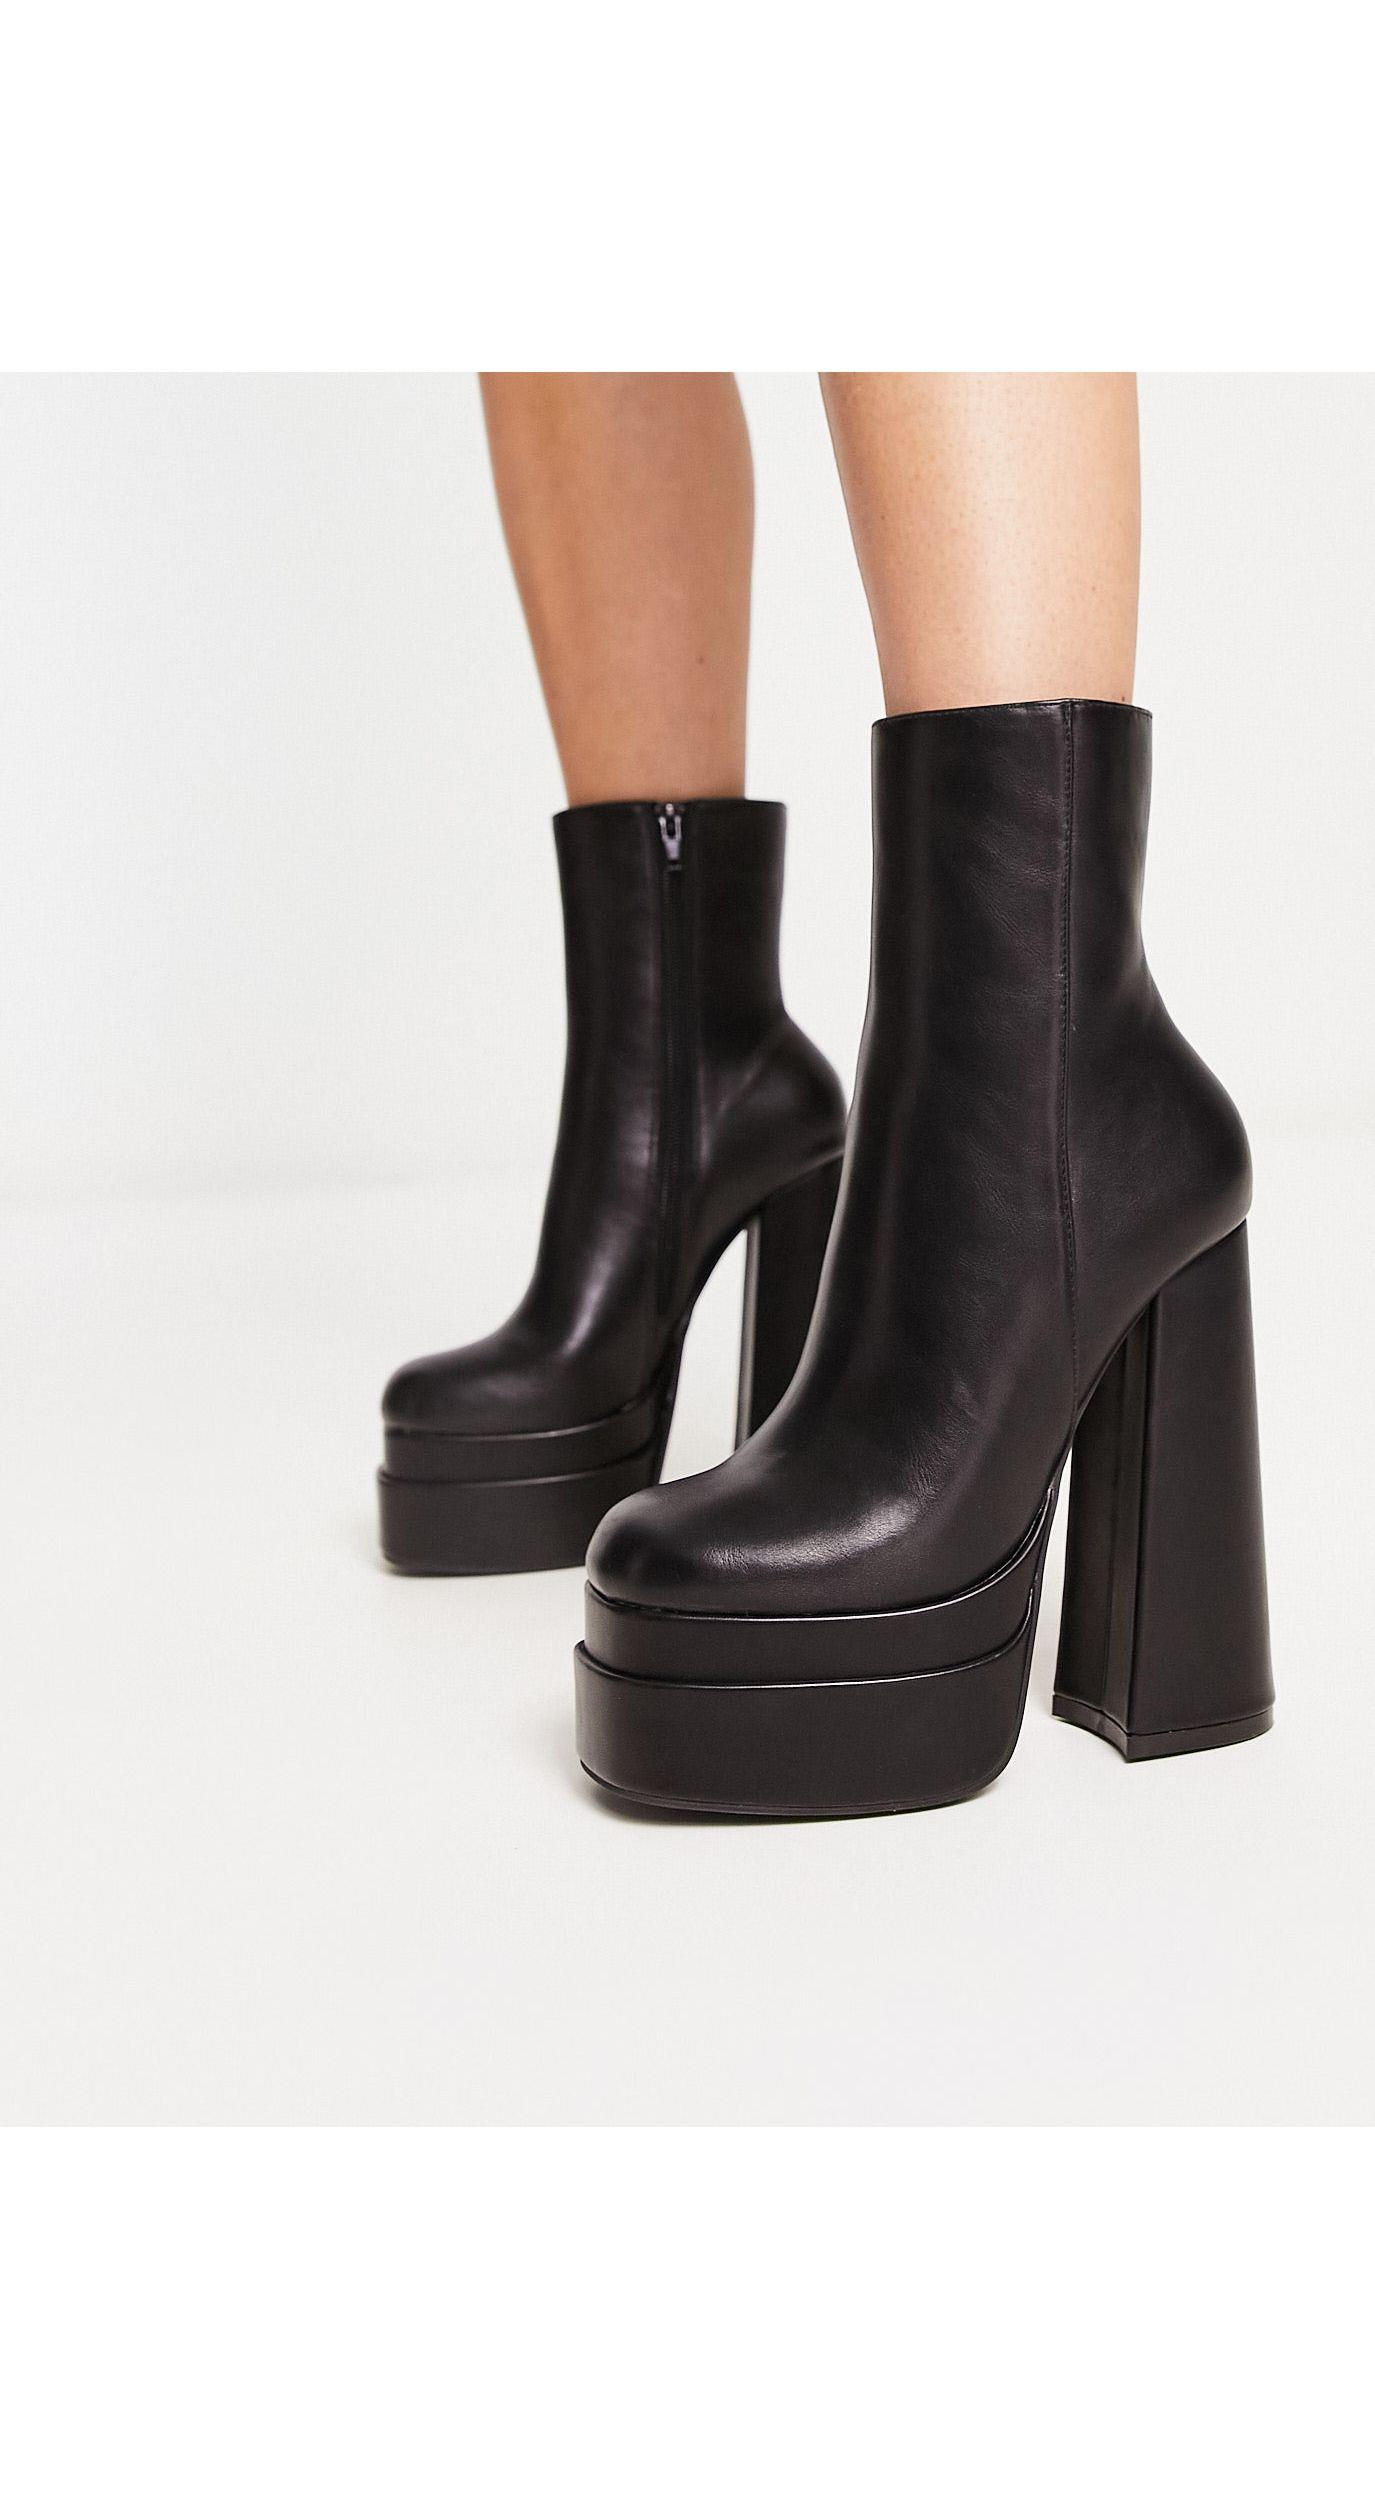 Truffle Collection Double Platform High Ankle Boots in Black | Lyst